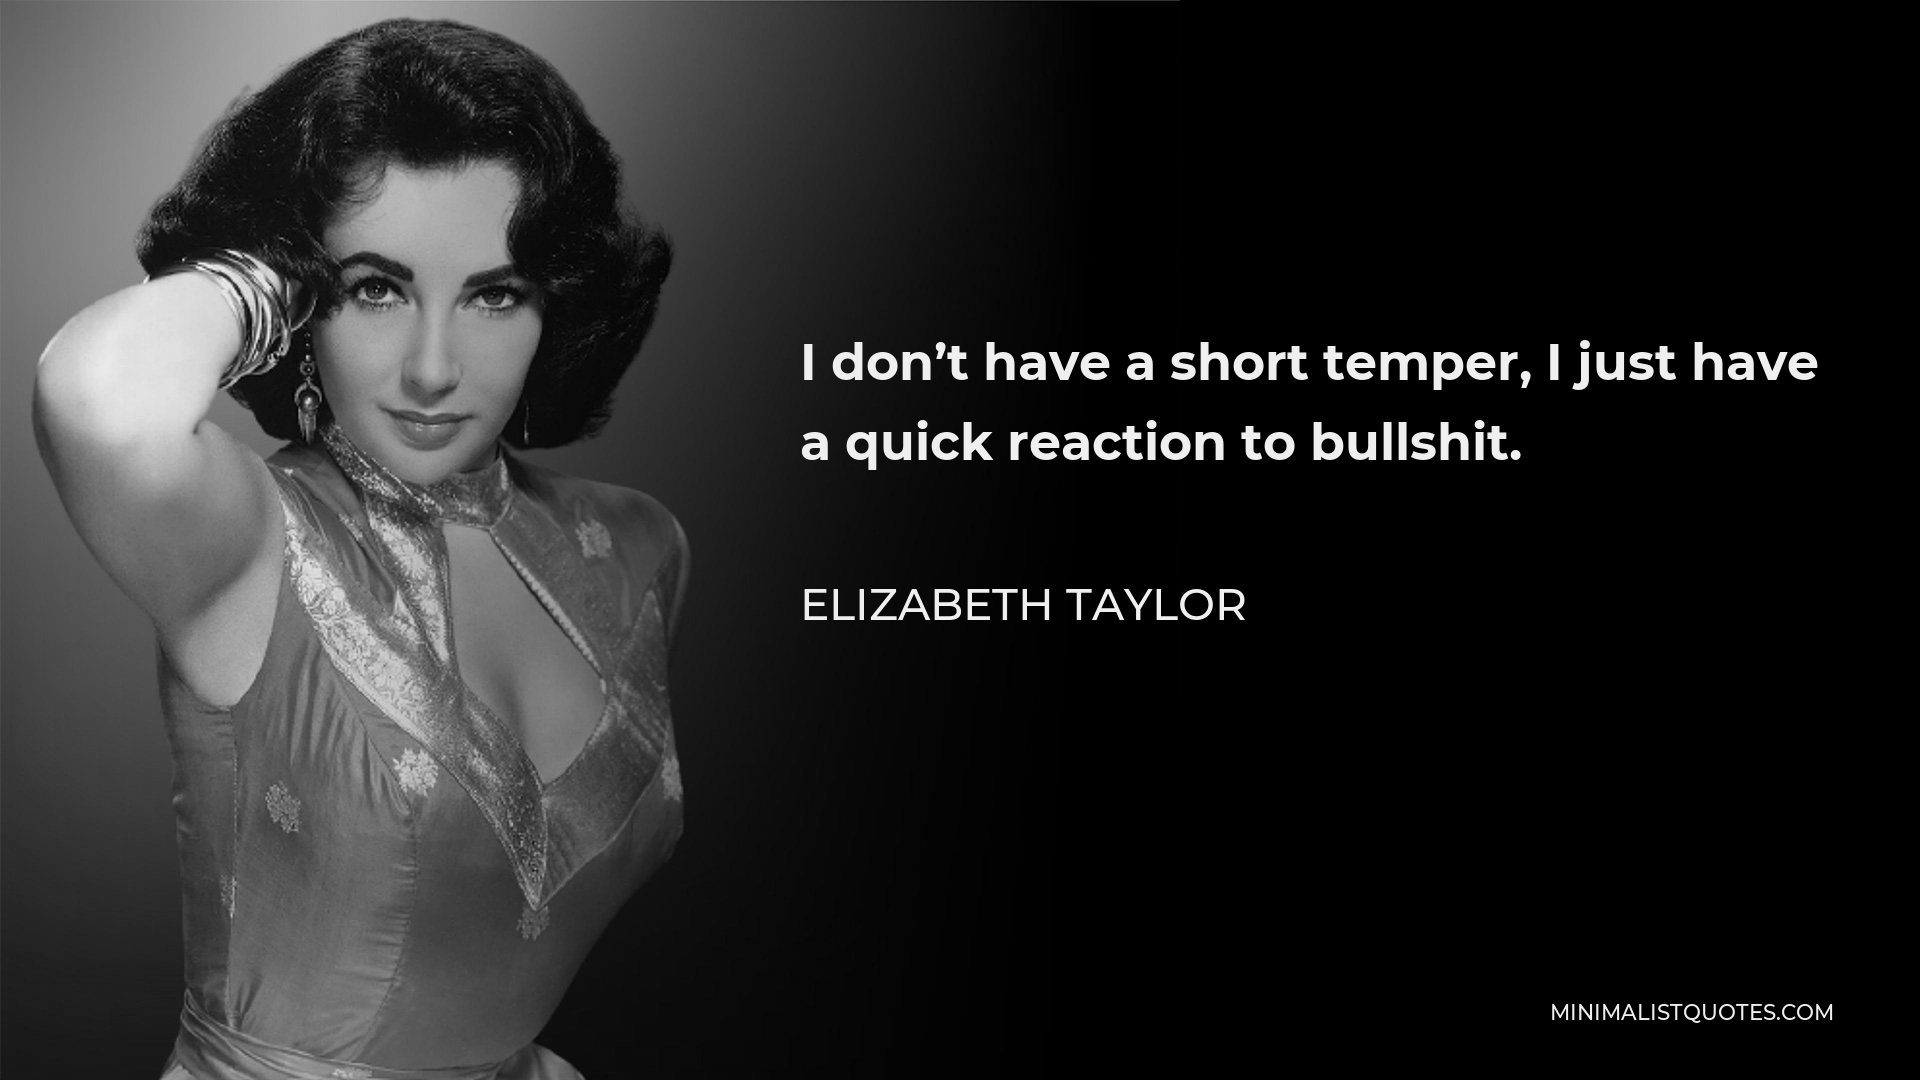 Elizabeth Taylor Quote - I don’t have a short temper, I just have a quick reaction to bullshit.